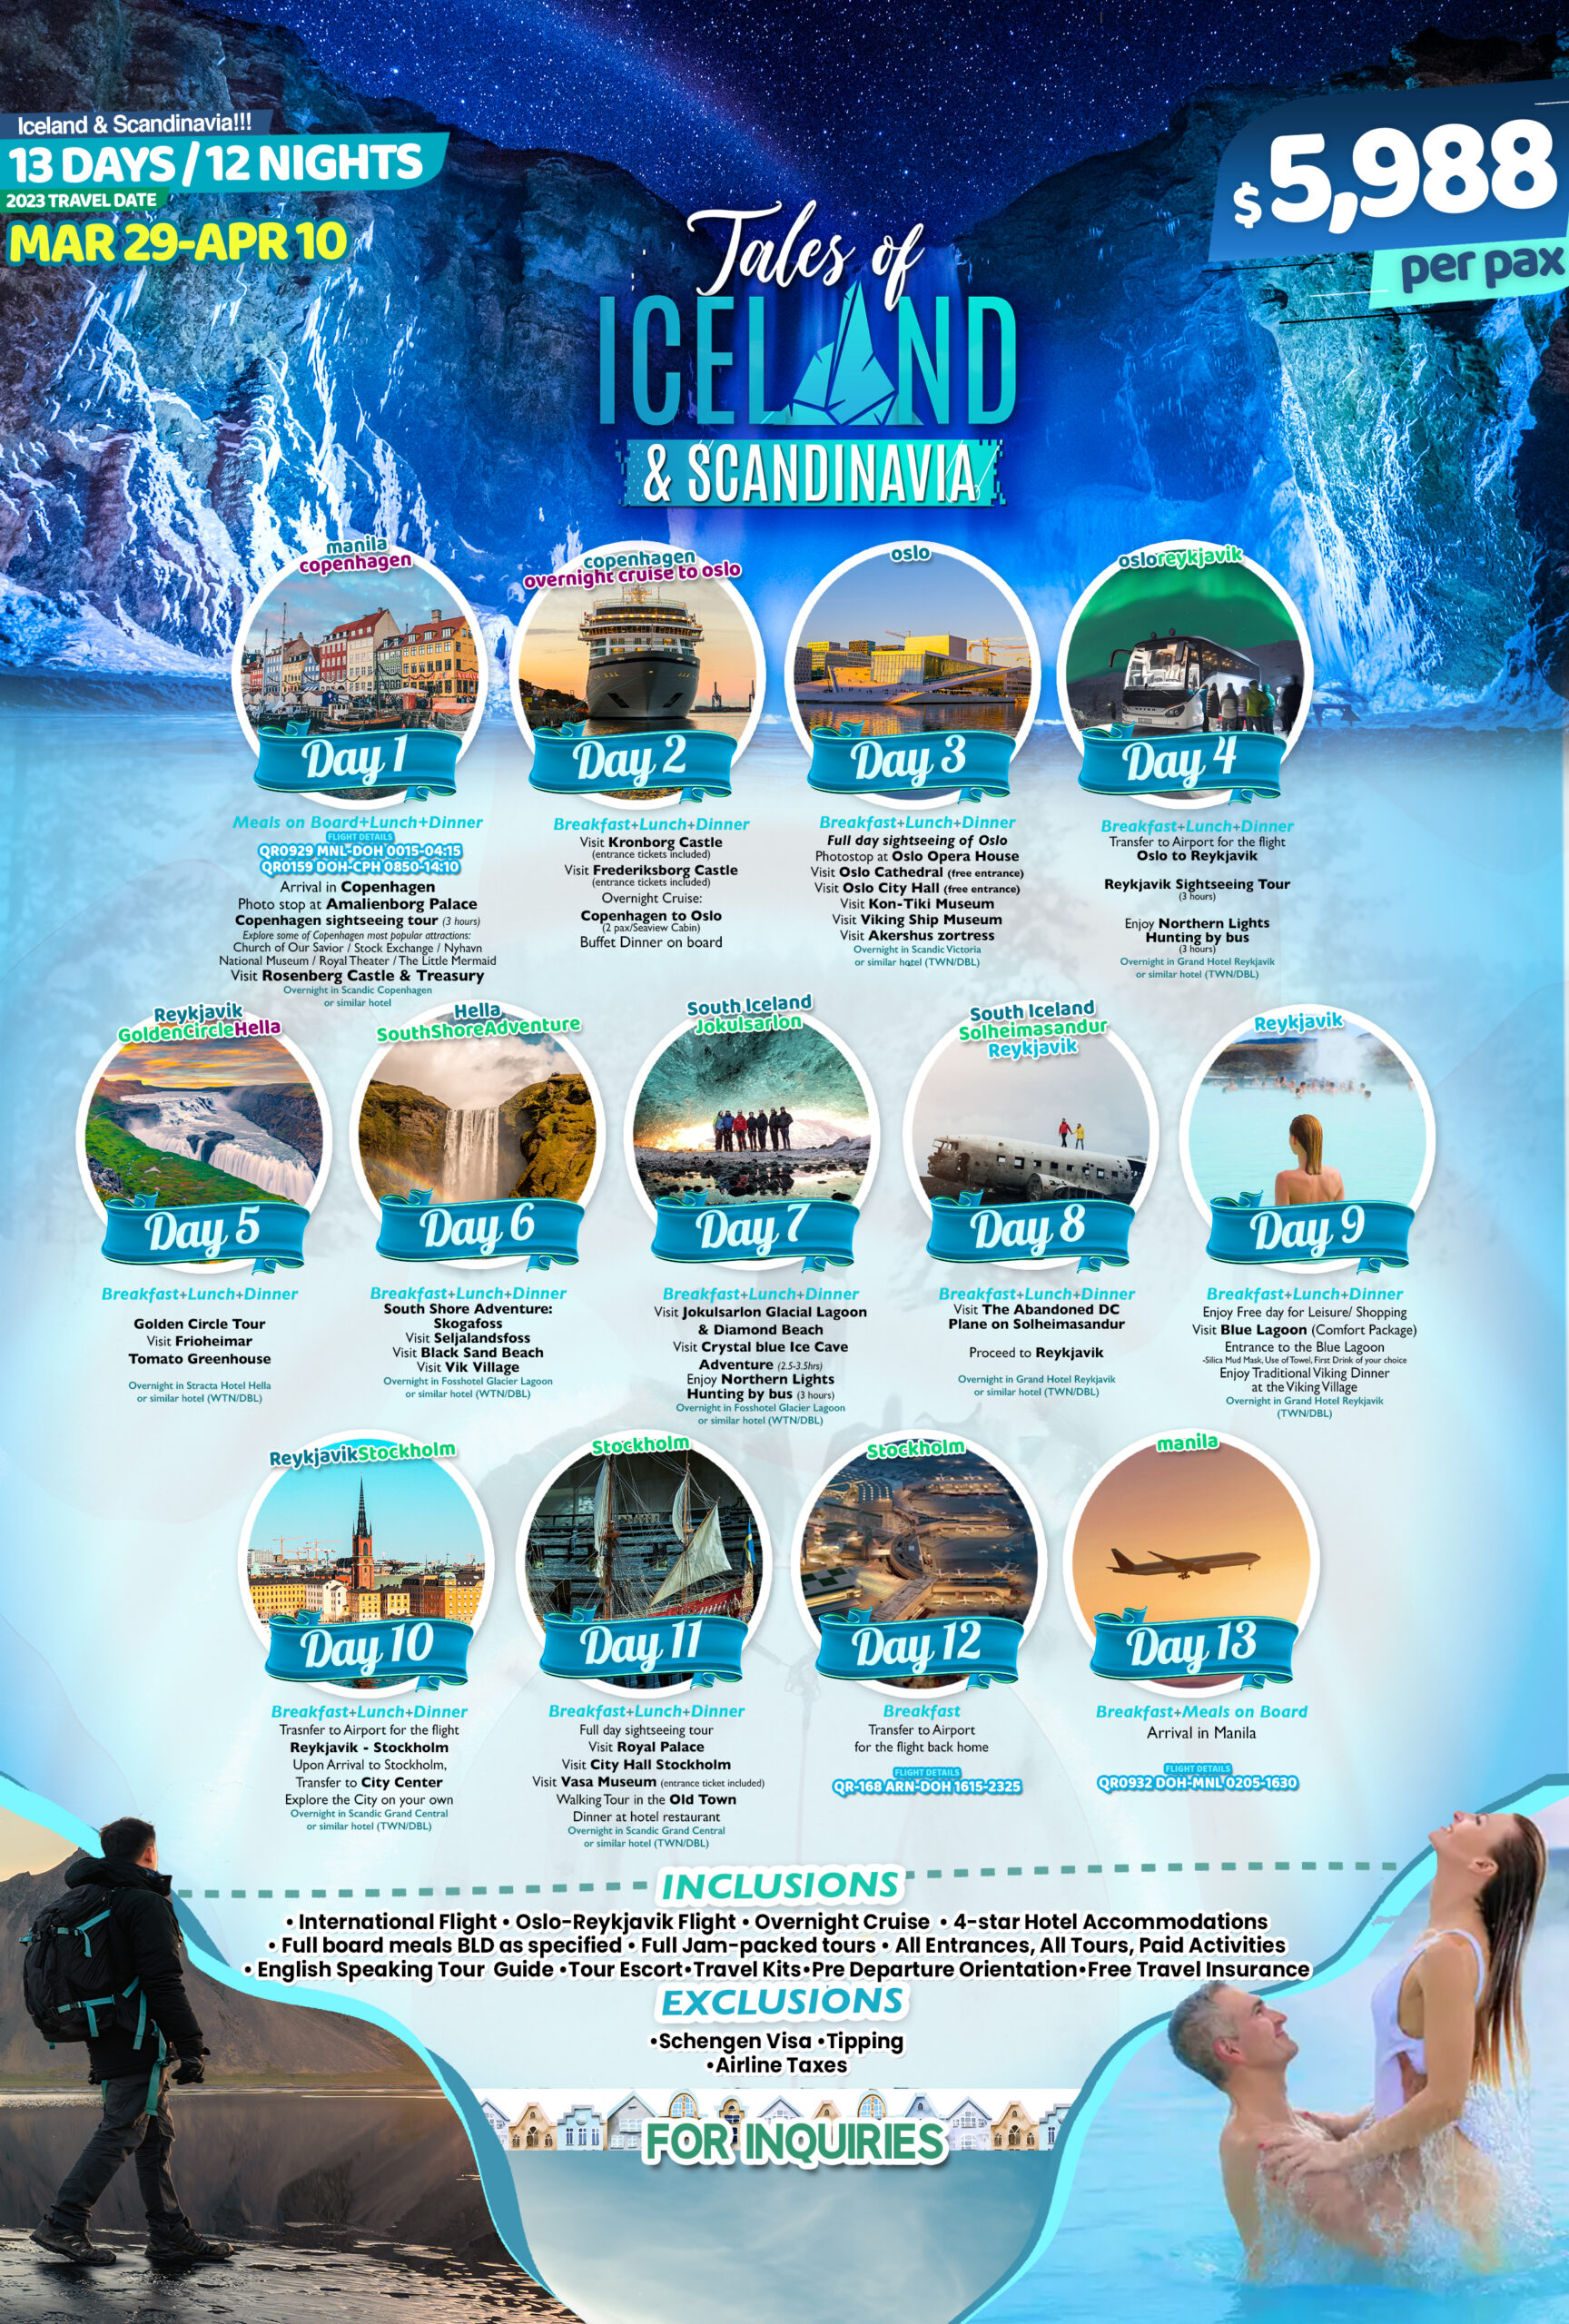 iceland package tour philippines